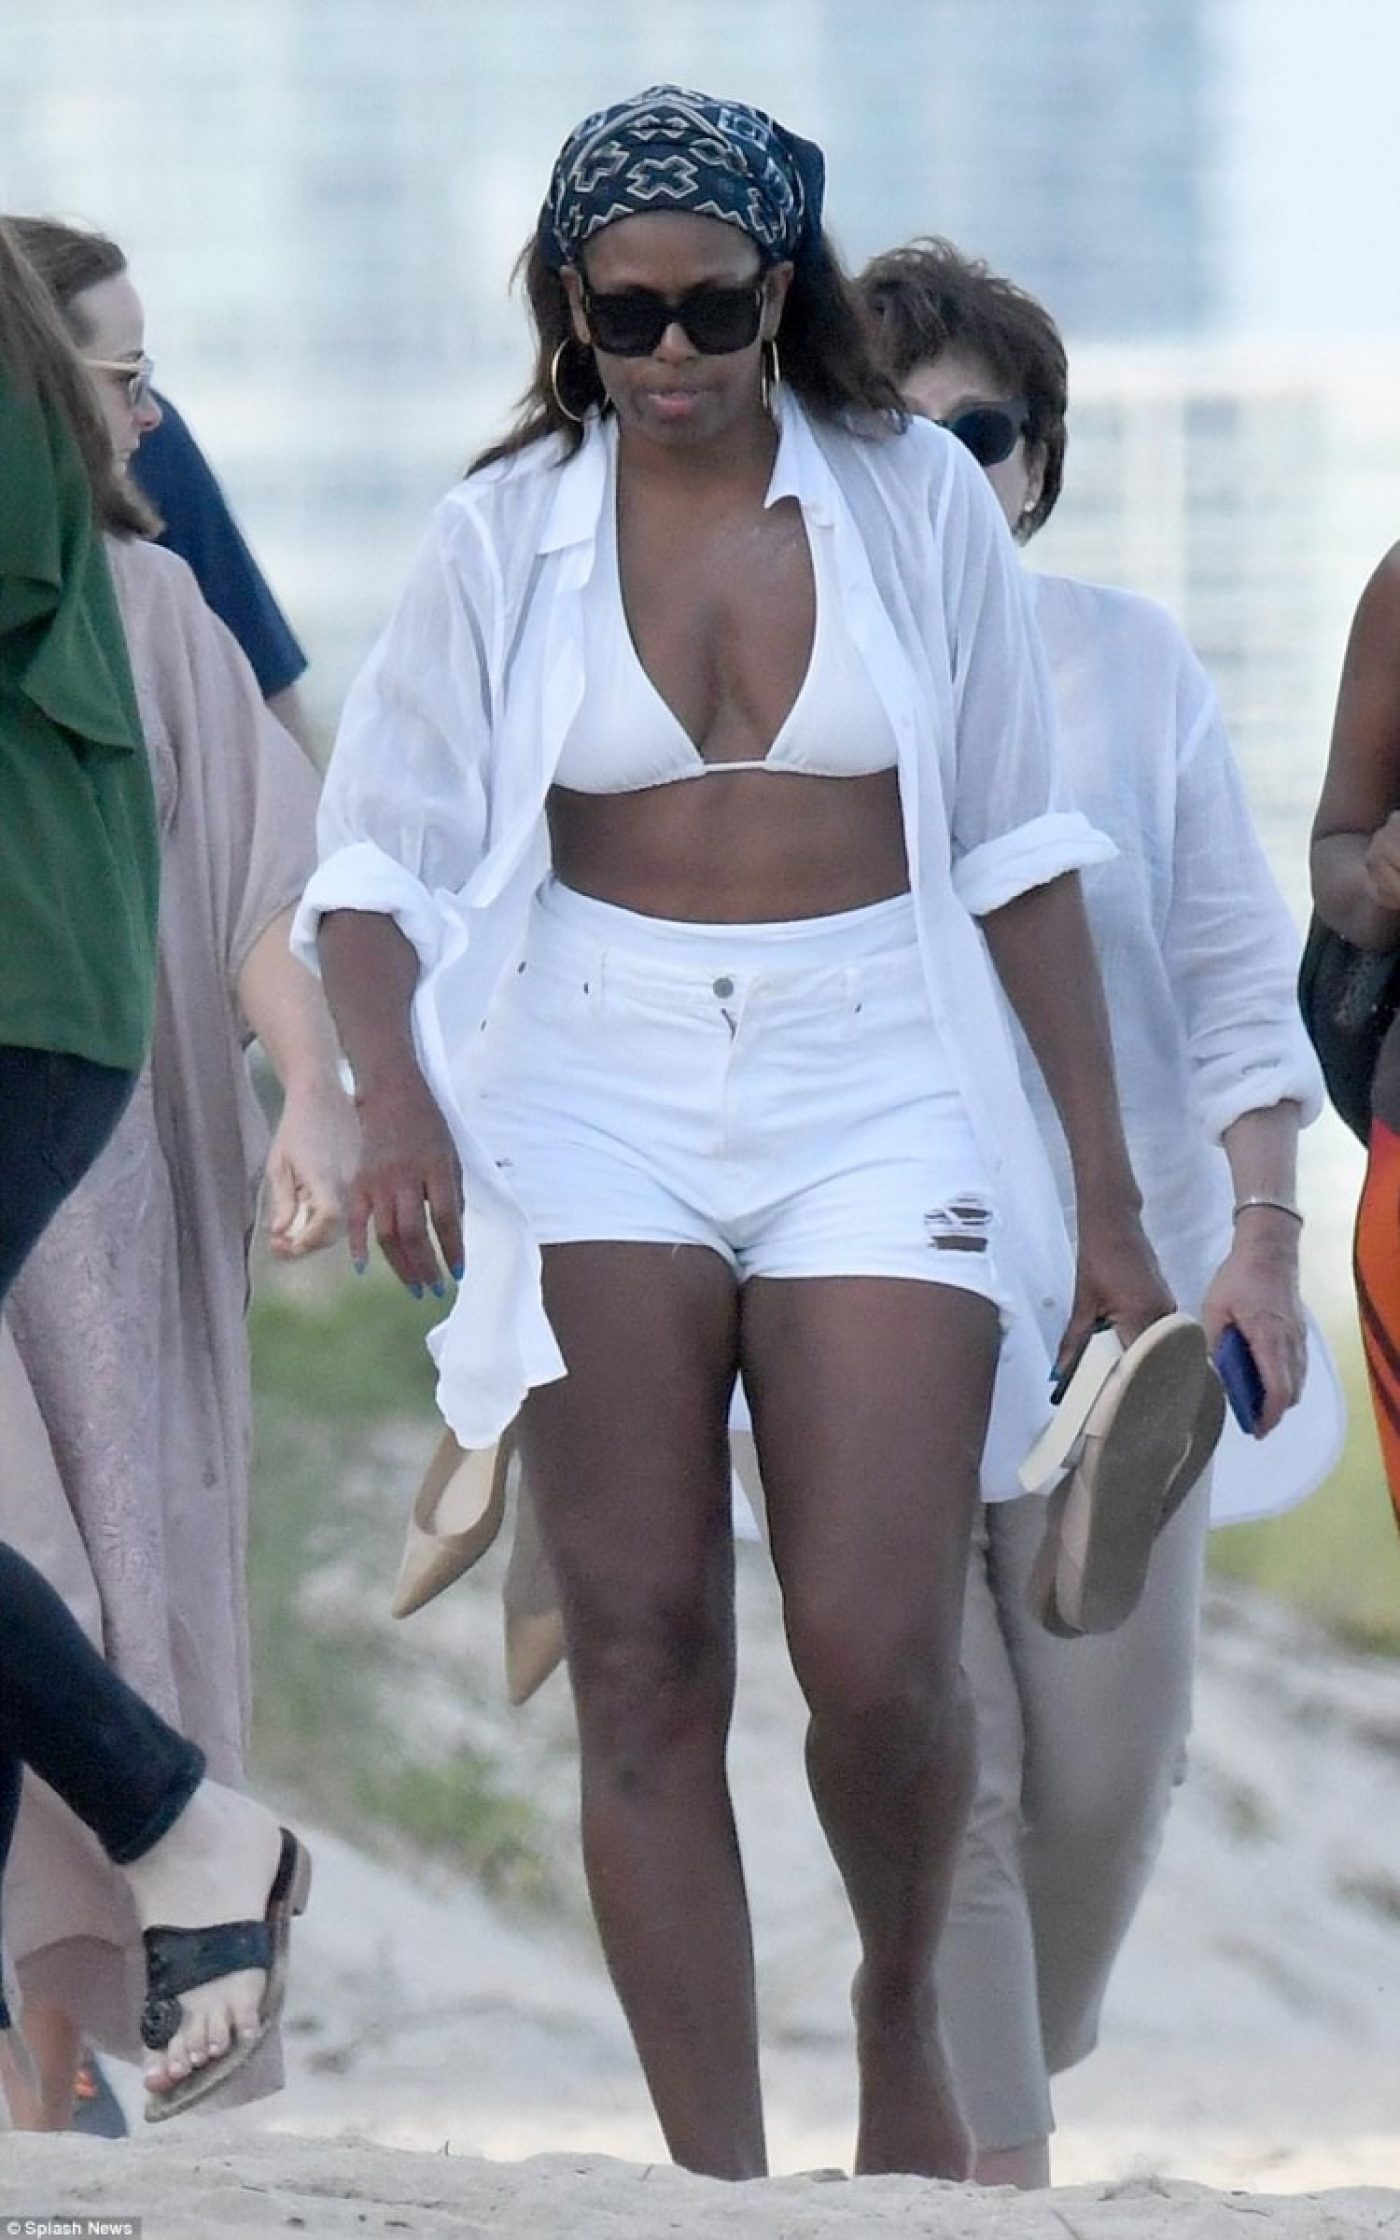 Michelle Obama Was Pictured Looking Sensational In A White Bikini And We Can T Believe Our Eyes